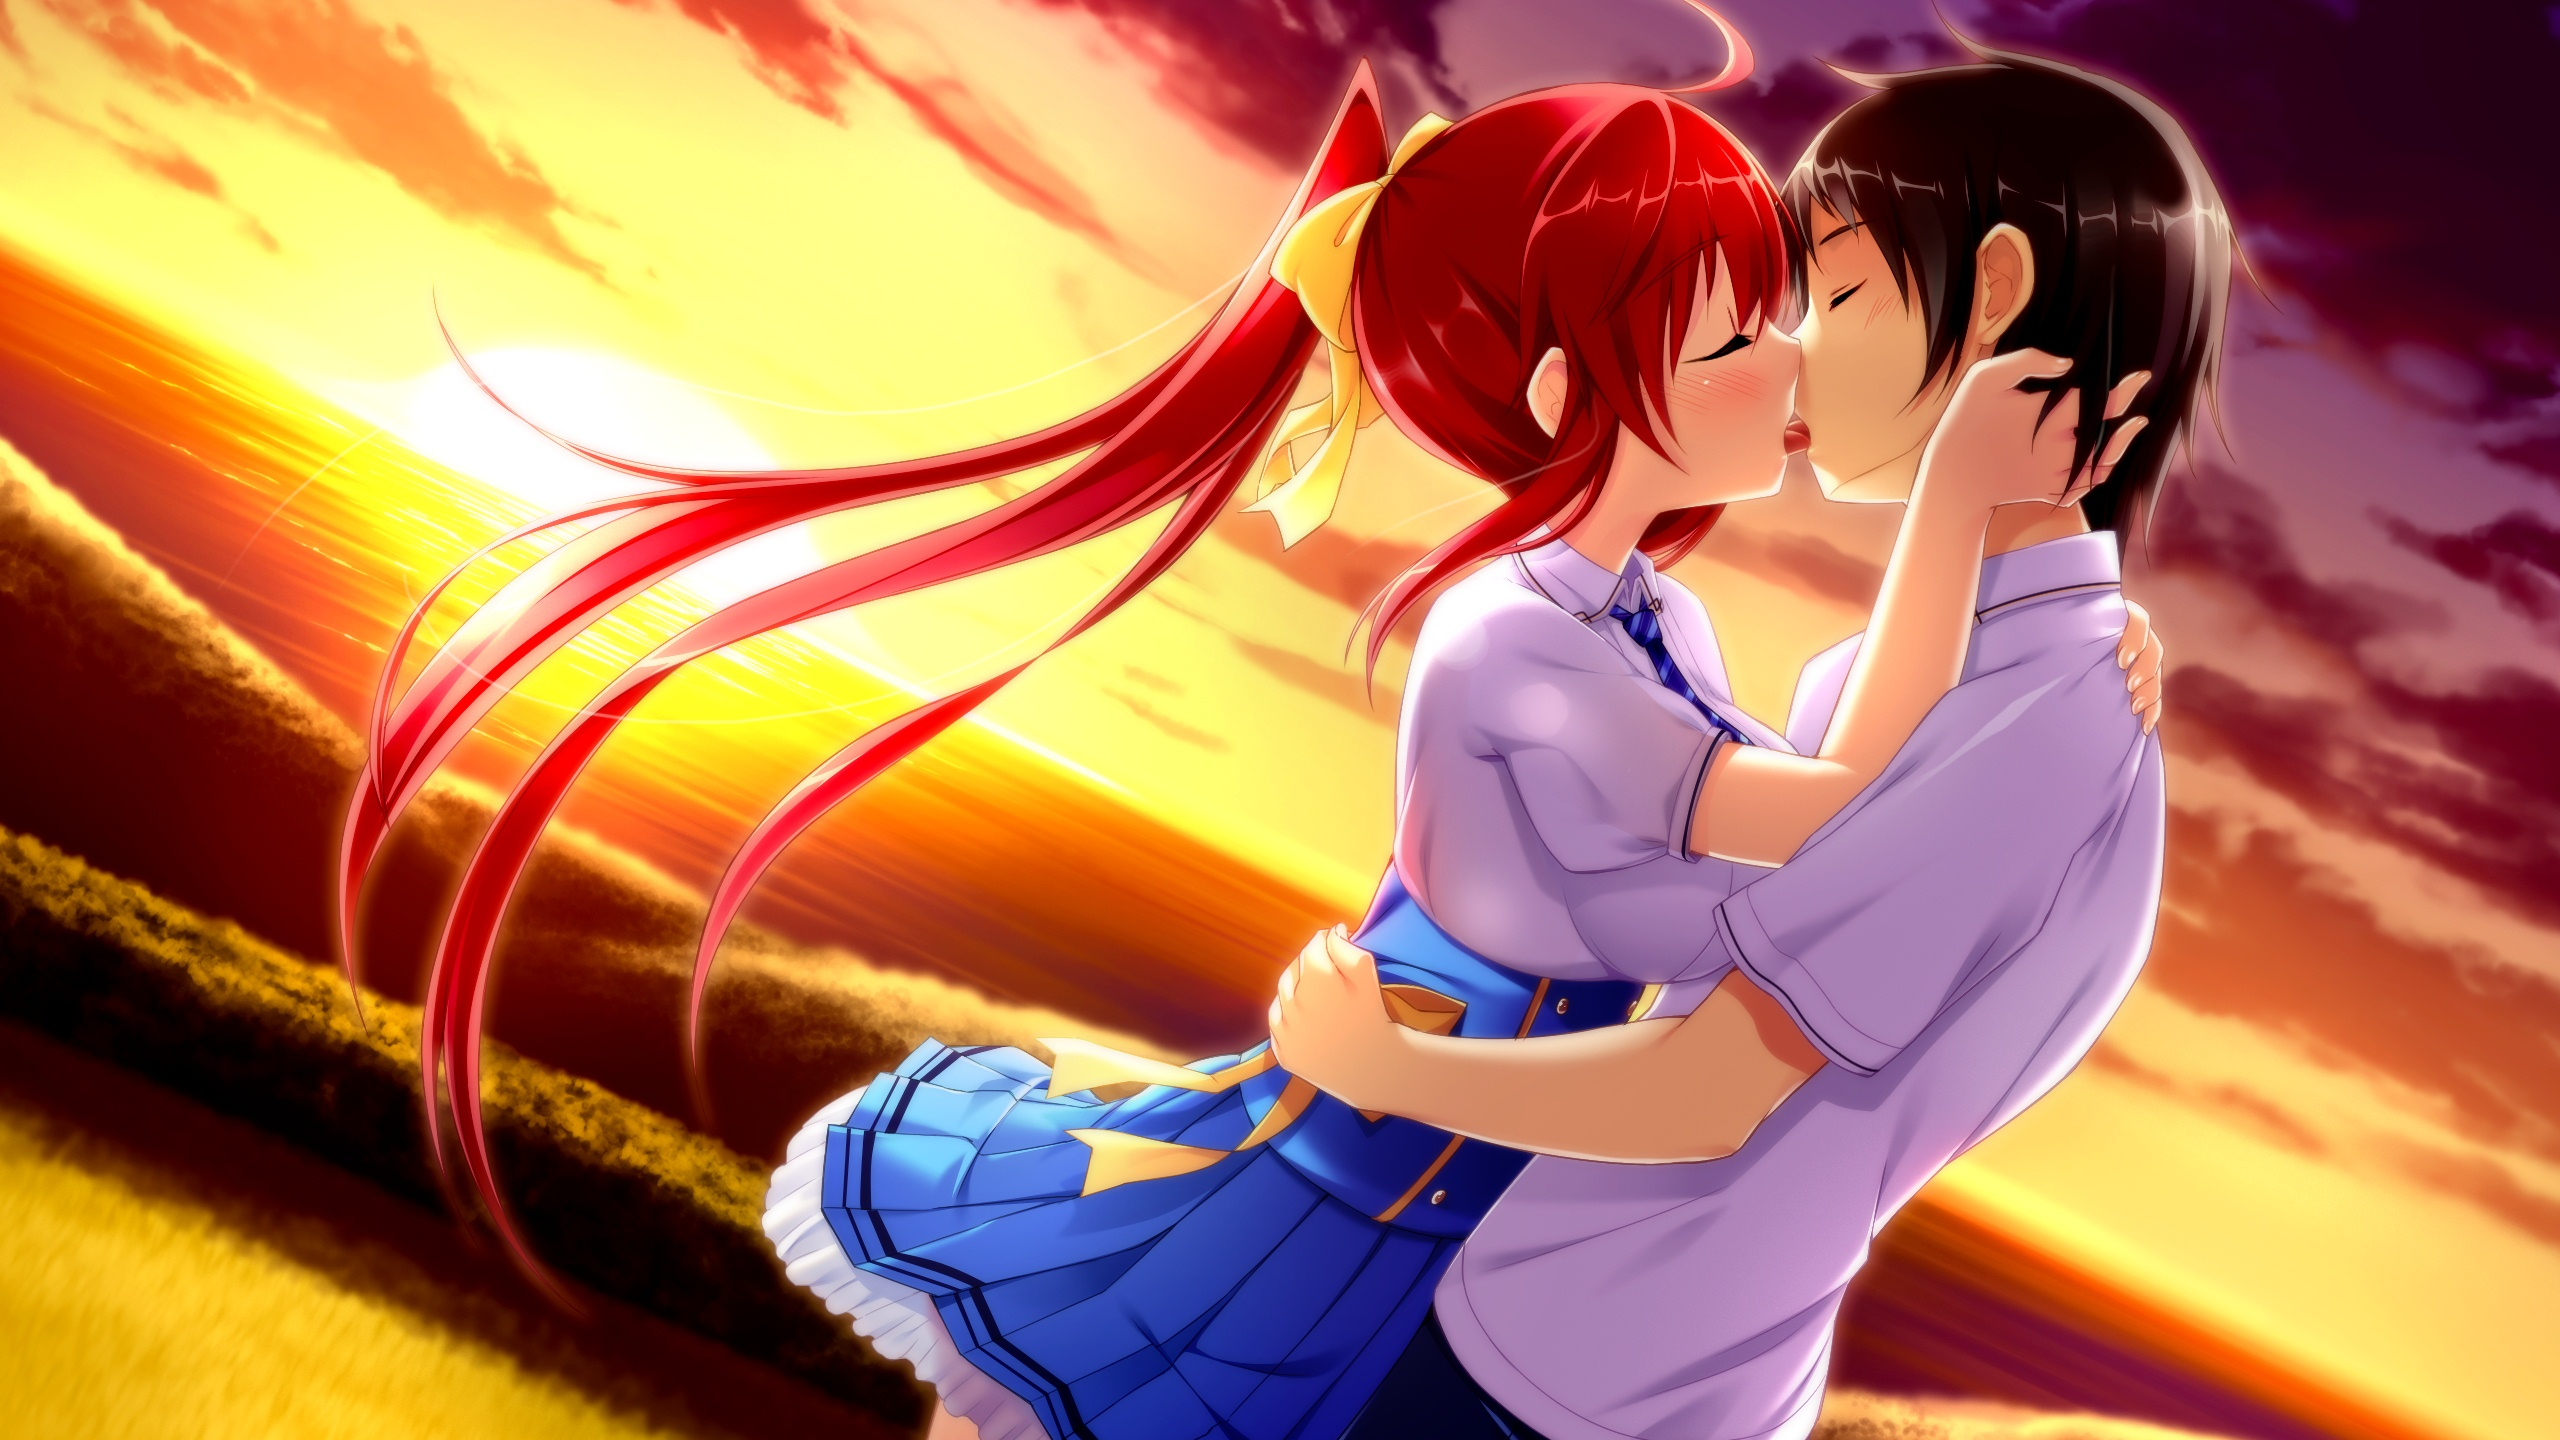 Love Each Other Anime Couple Kissing With The Sun Behind Them Backgrounds